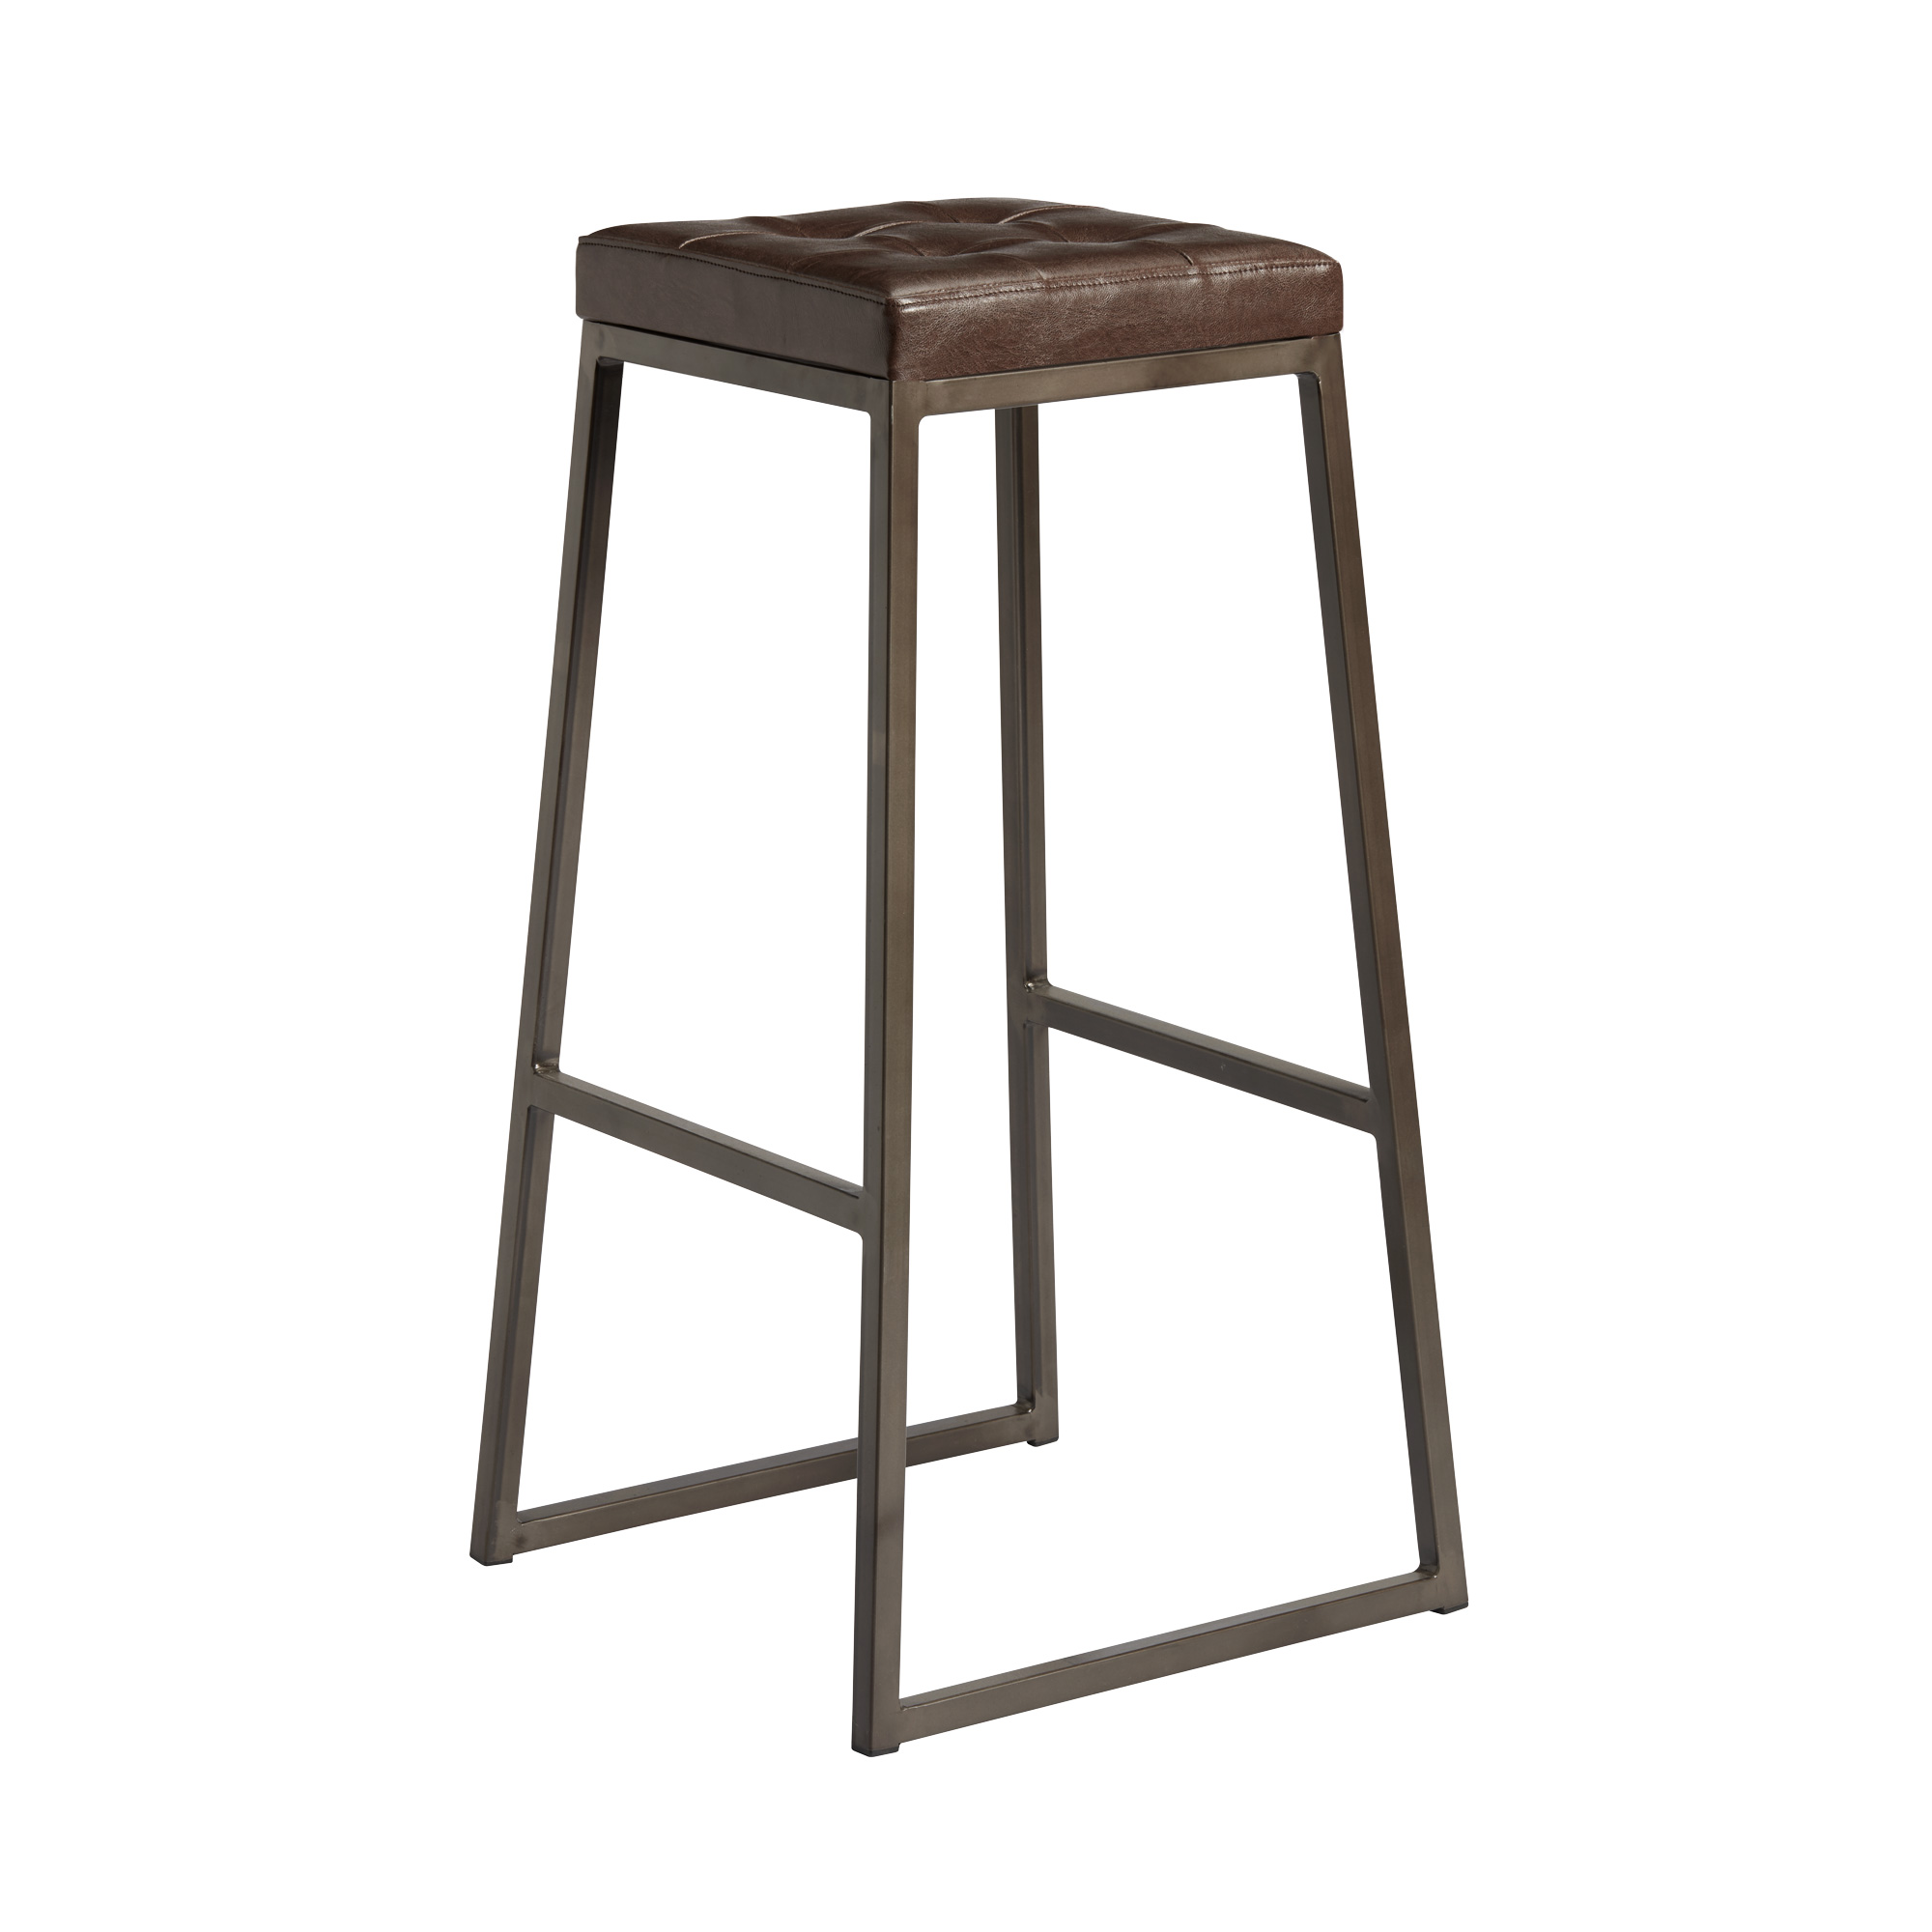 Style High Stool - Leather